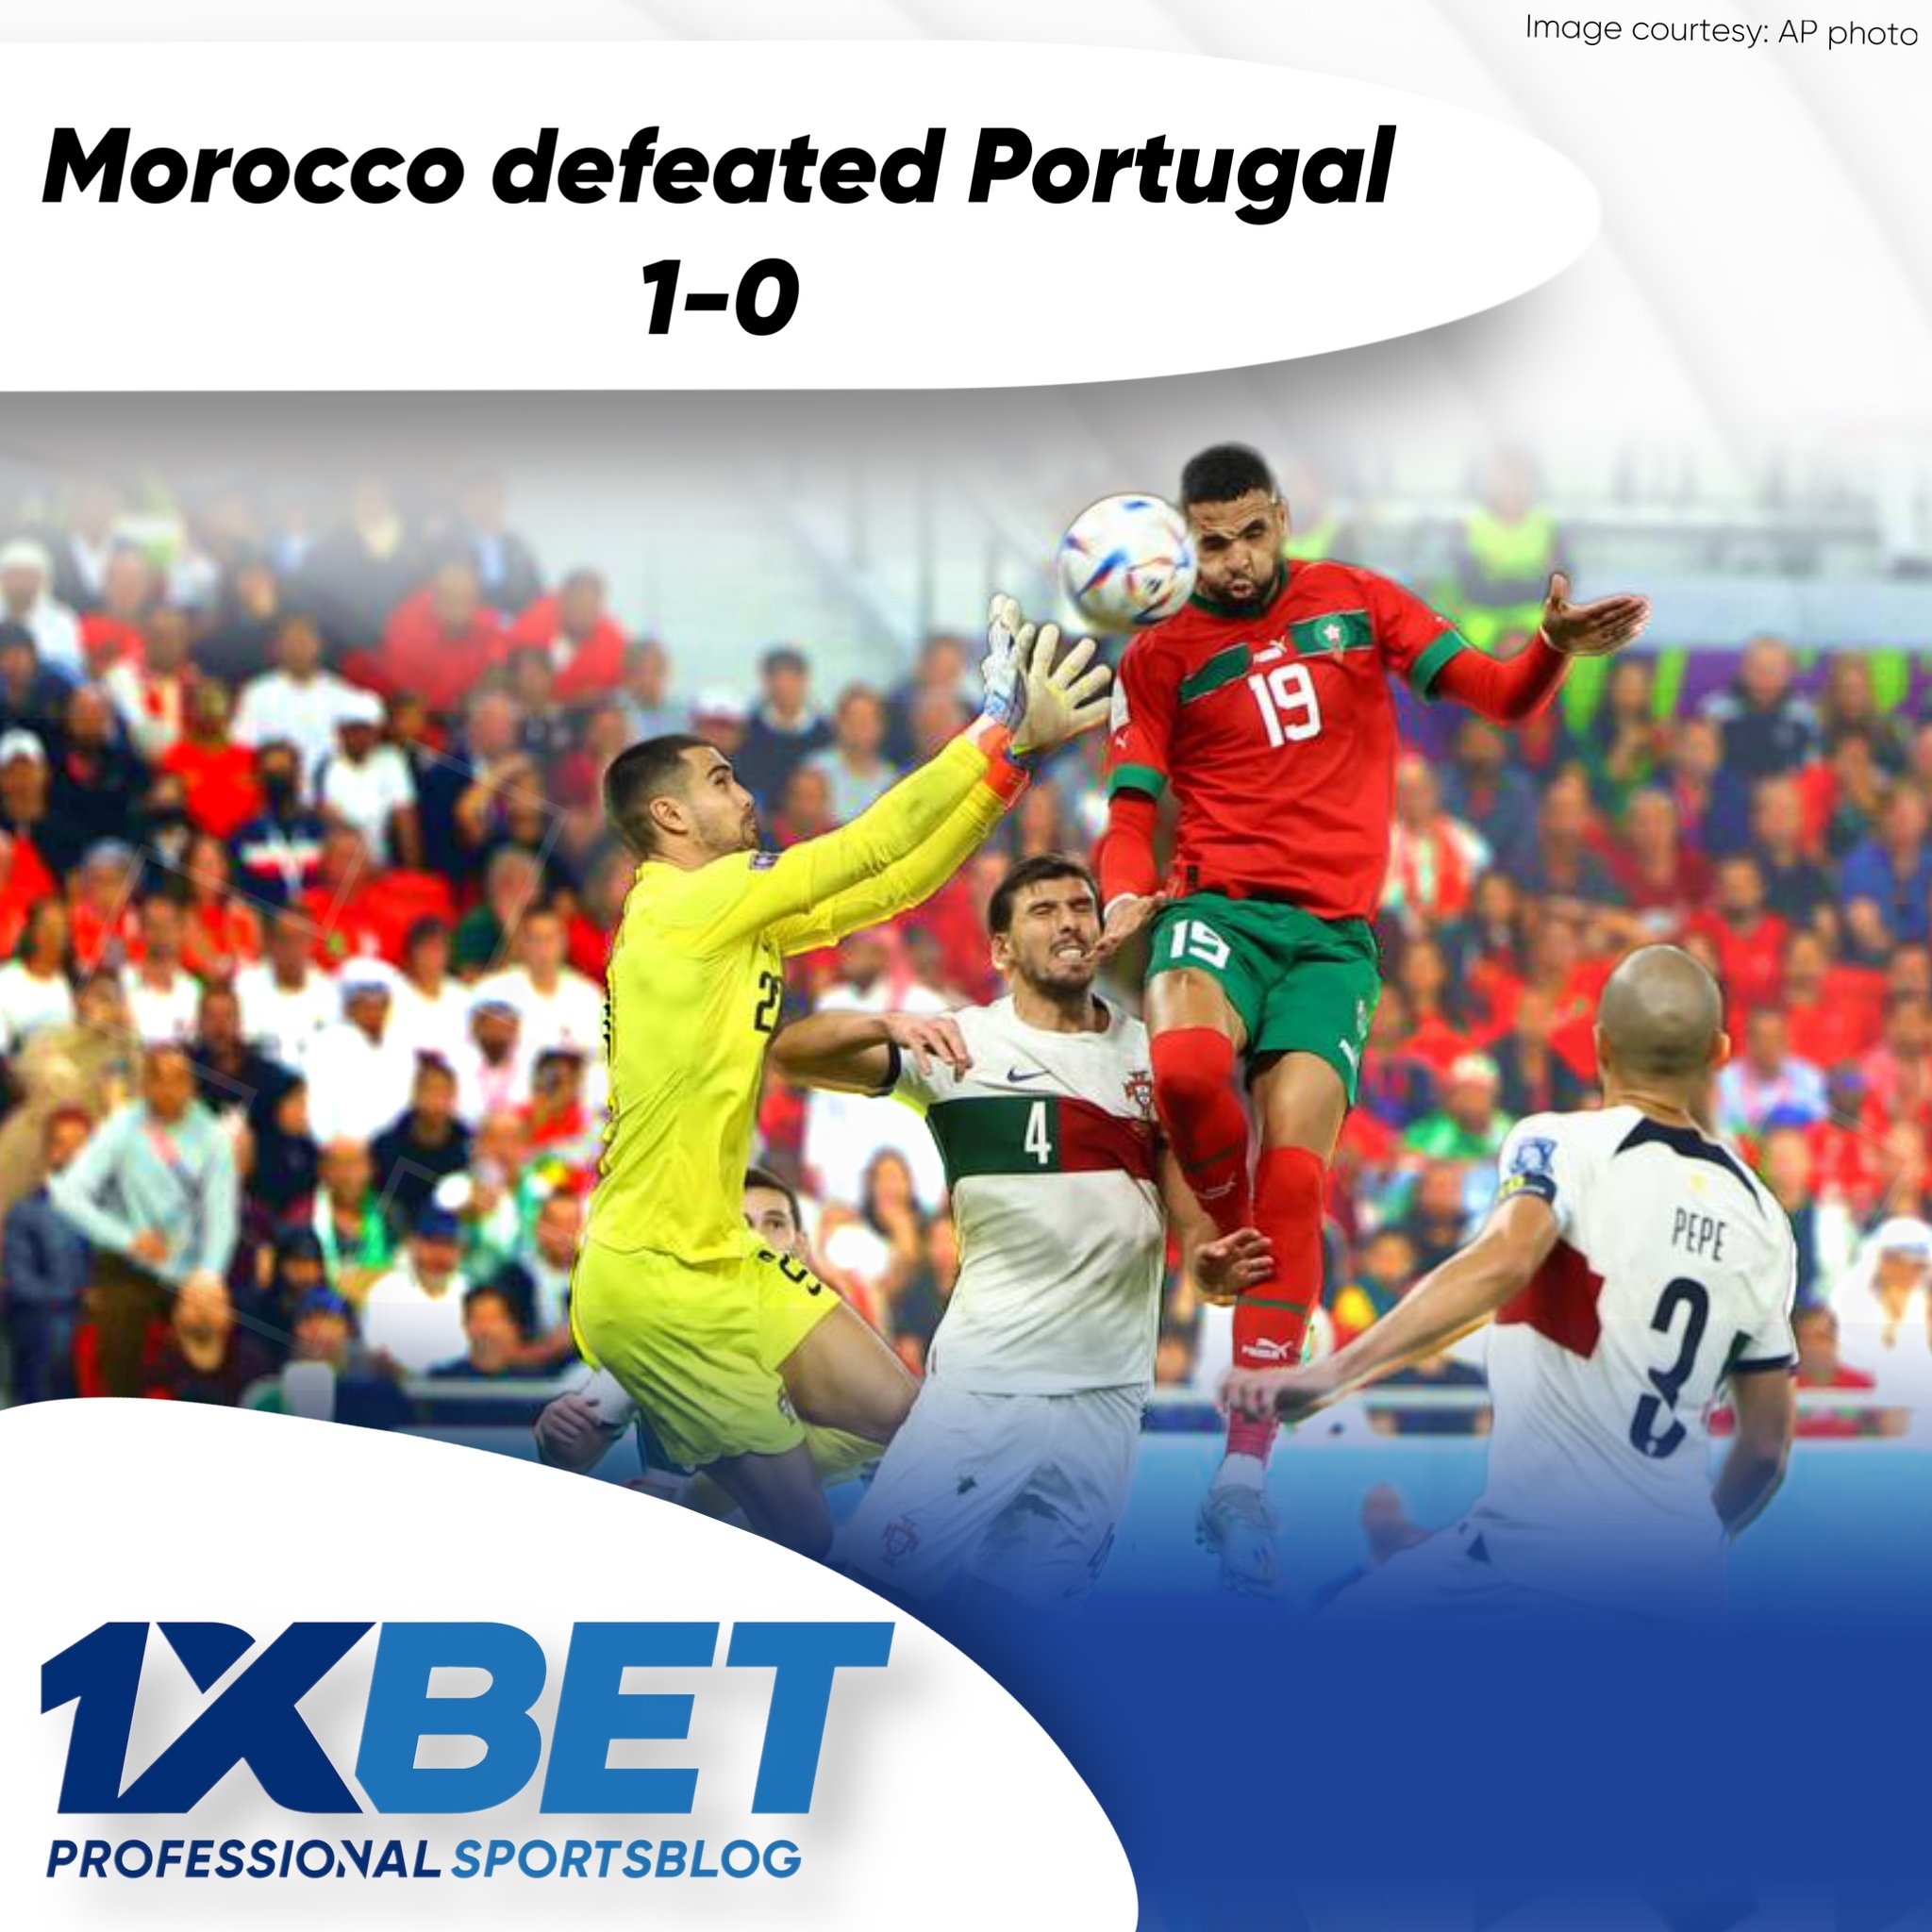 Morocco defeated Portugal 1-0